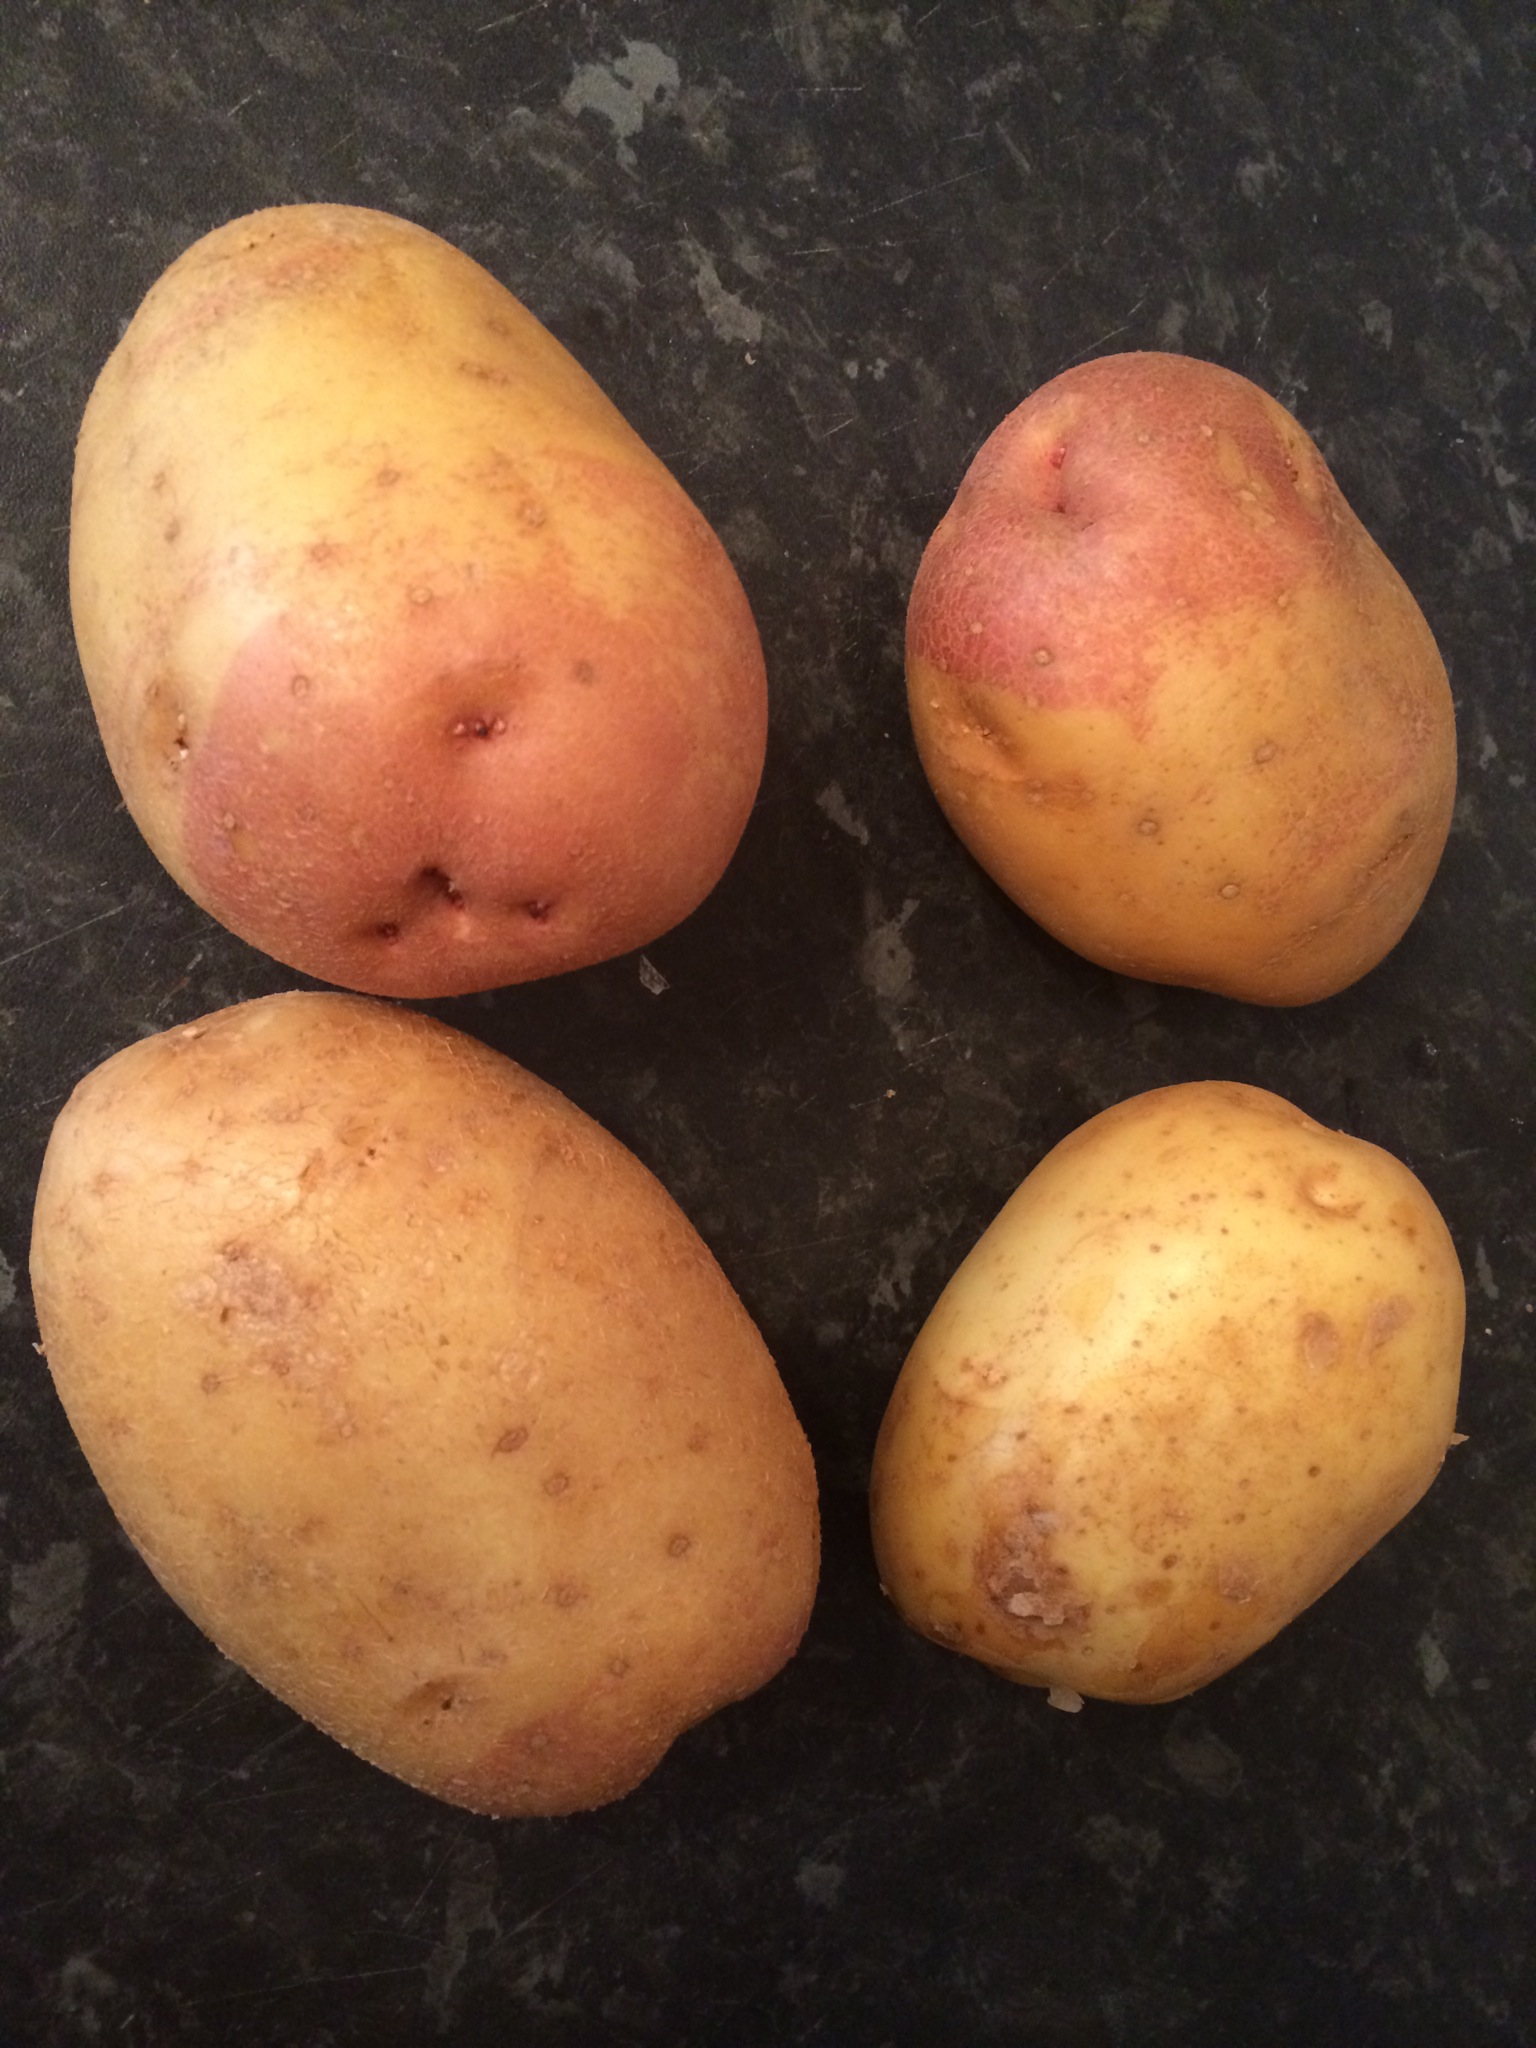 This much potato will make enough for four, or two hungry gannets like me and my hubby